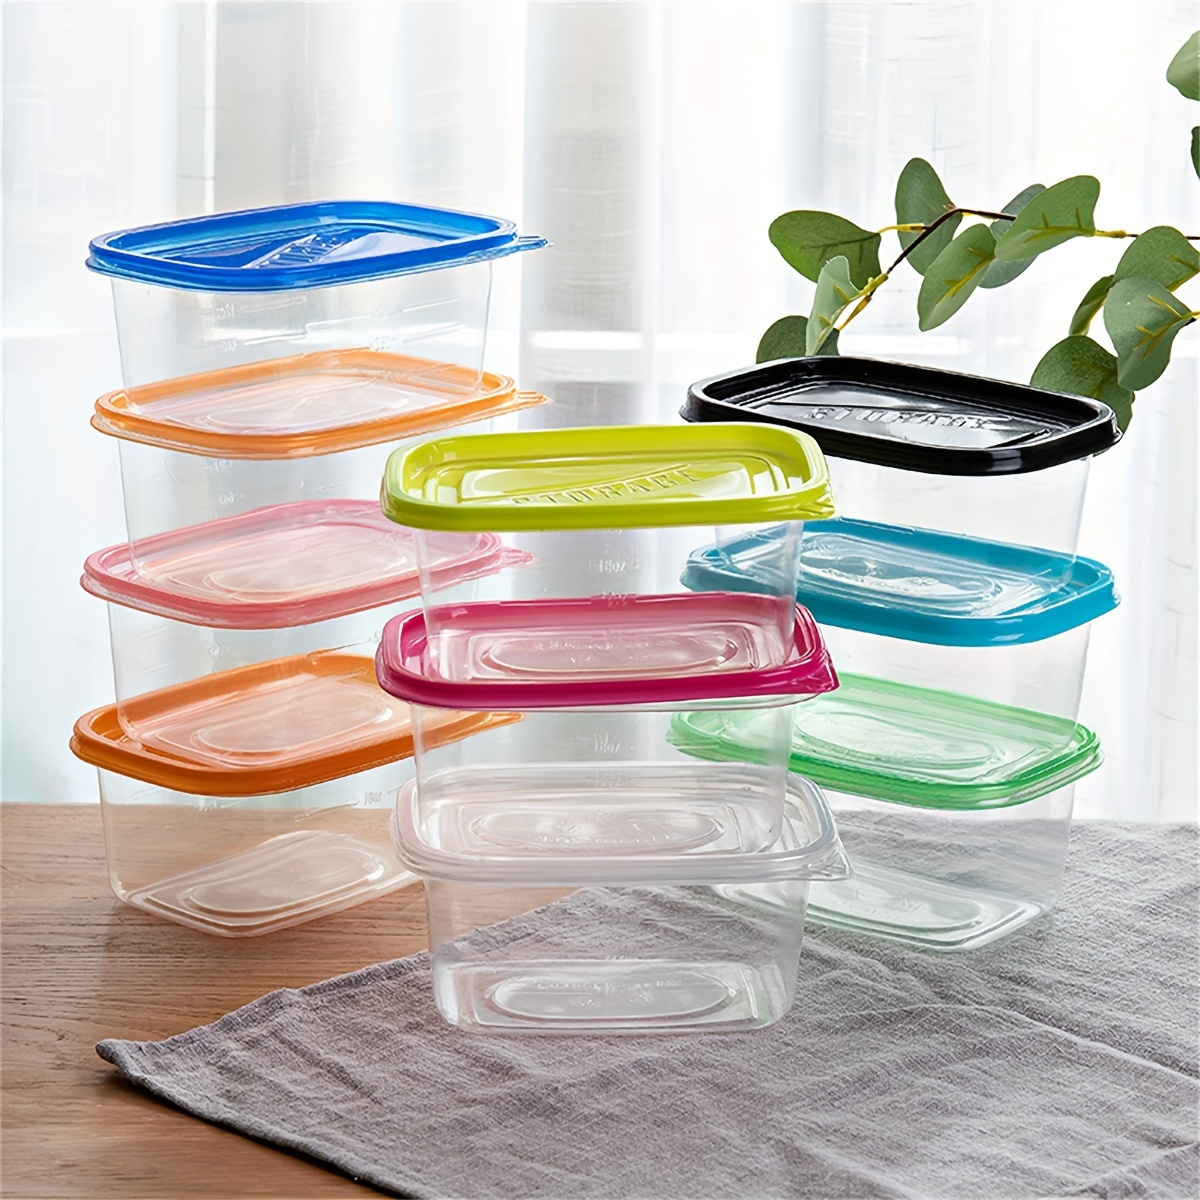 

10-piece Stackable & Reusable Lunch Boxes - Transparent, Sealed Food Storage Containers For Grains, Meats, Fruits & Vegetables - Essential Kitchen Organization